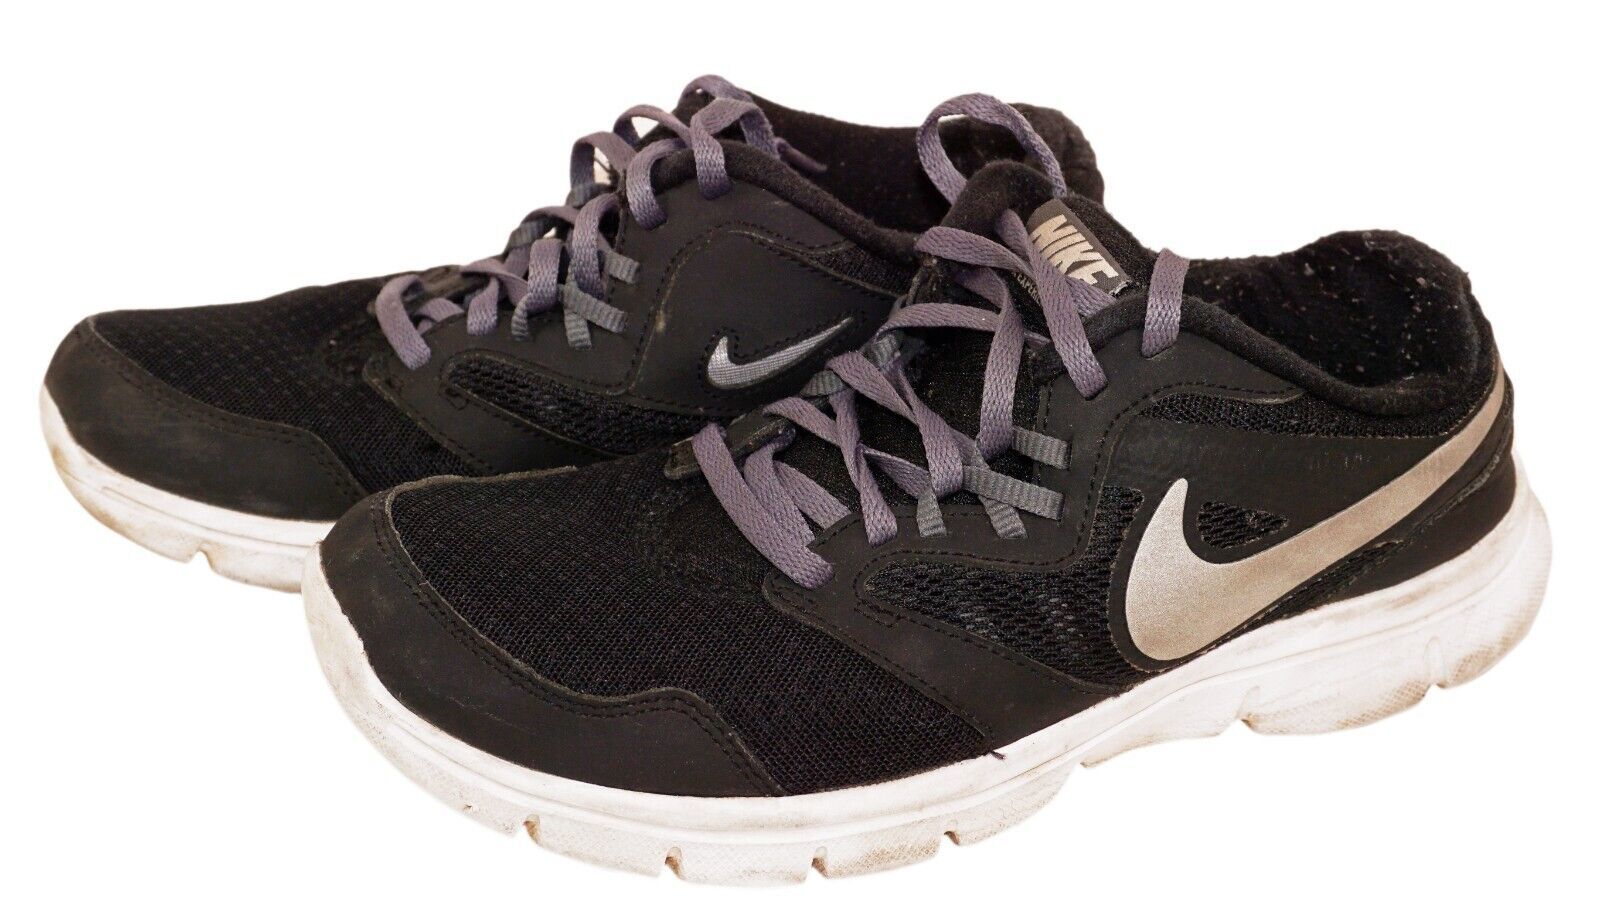 Primary image for Nike Flex Experience RN 3 Kids 5.5 Shoes - 653701 Blk/Gry/Wh 2014